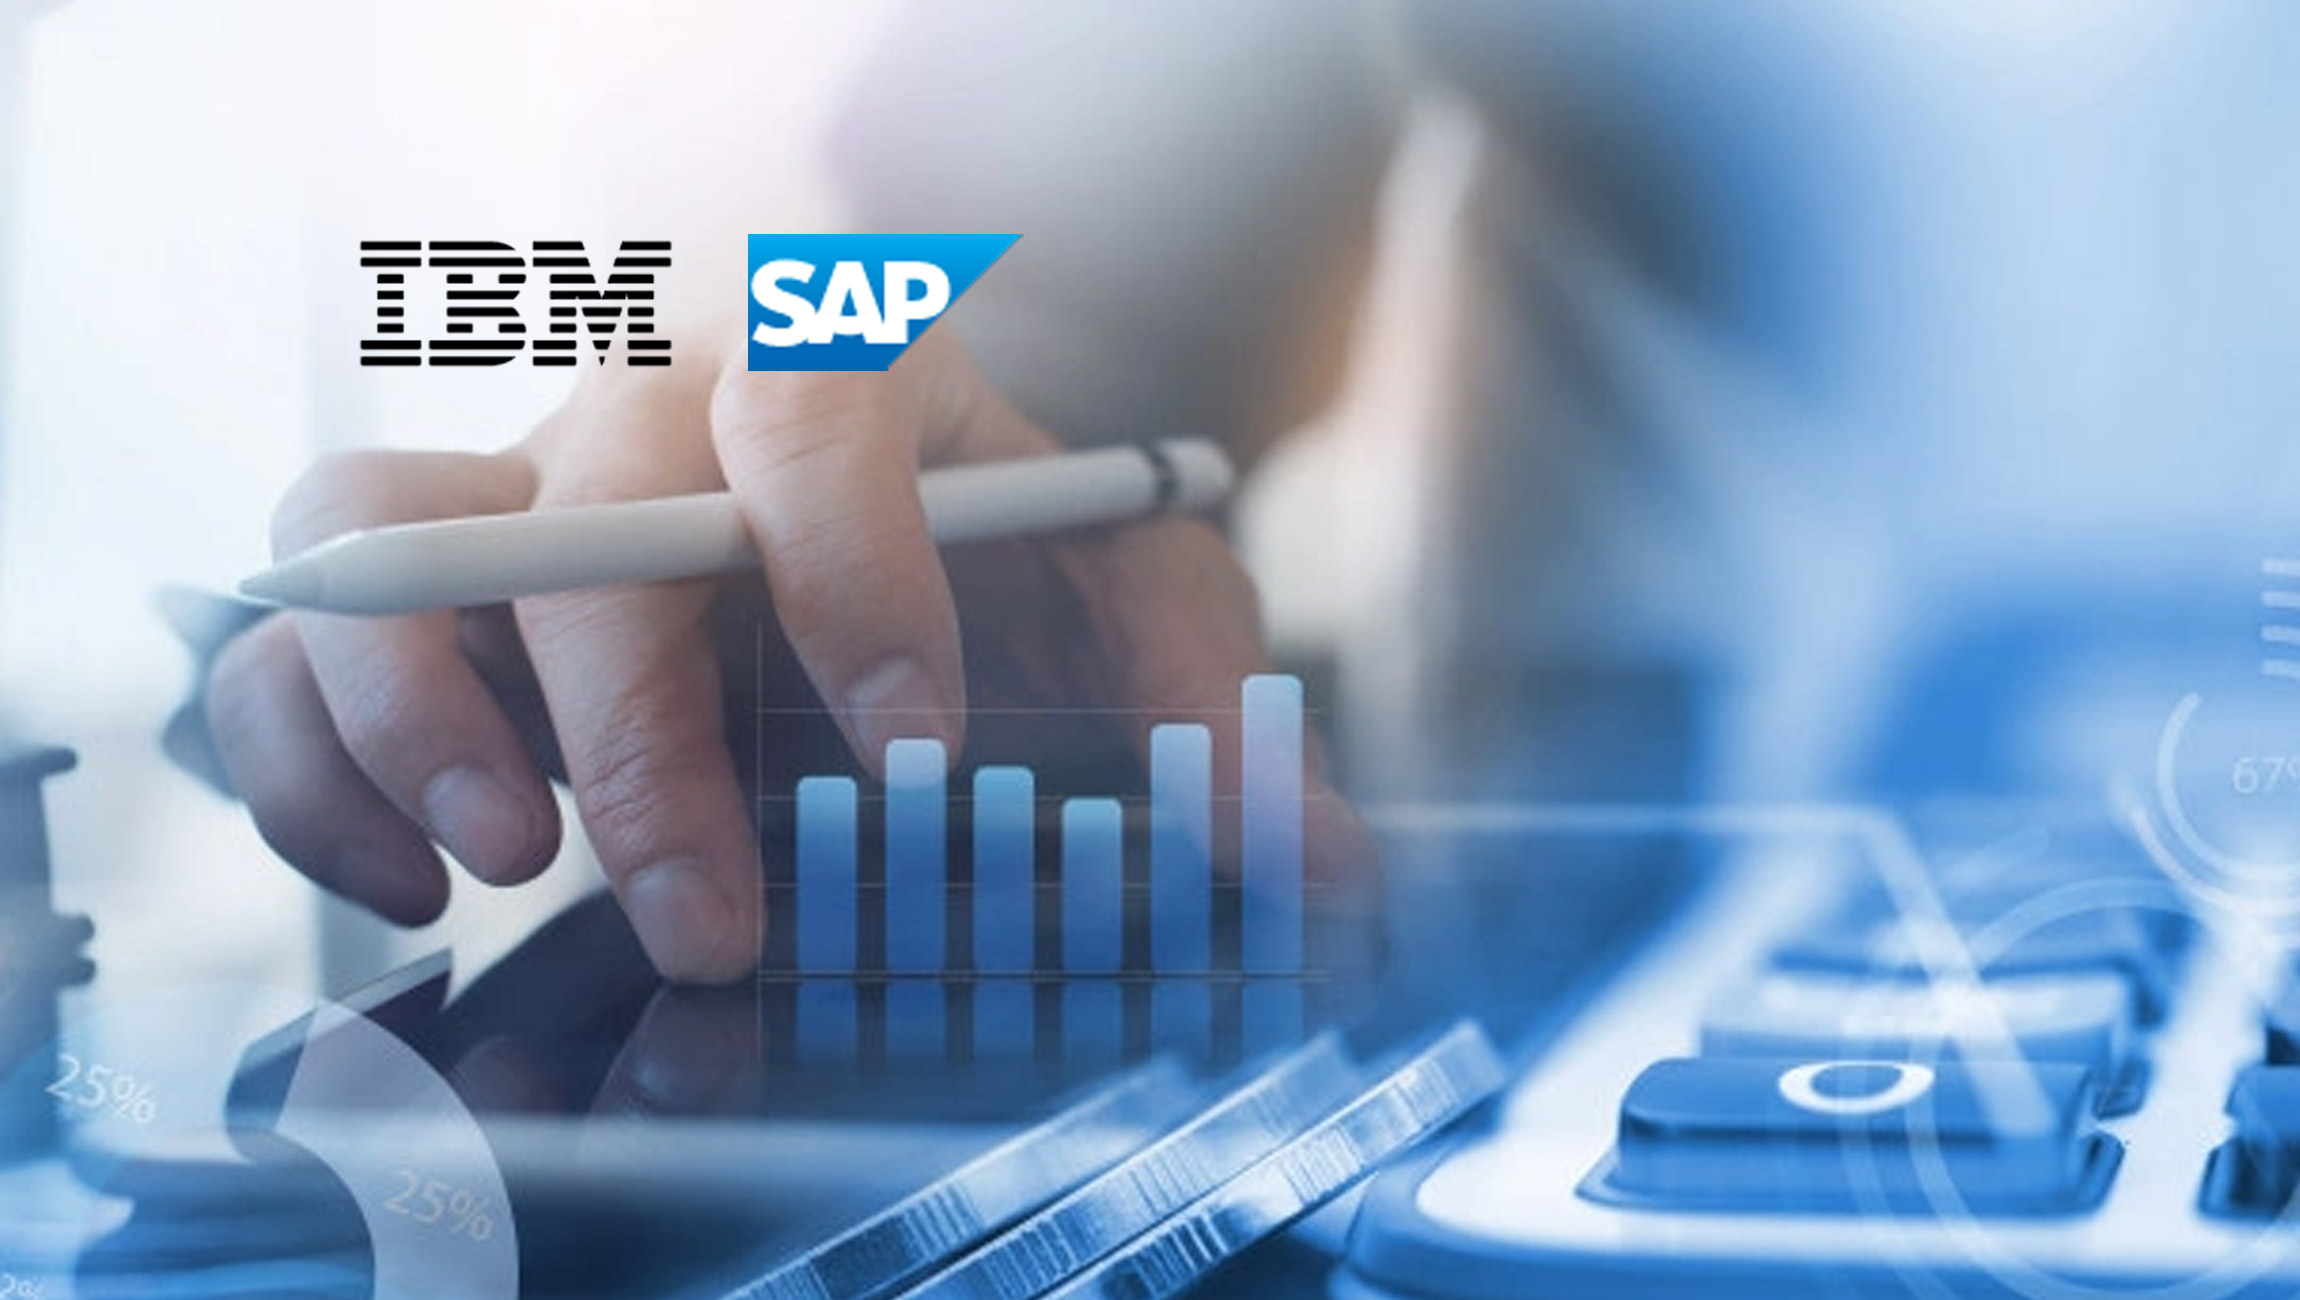 IBM and SAP to Help Financial Institutions Accelerate Cloud Adoption to Modernize Operations in a Secured Environment